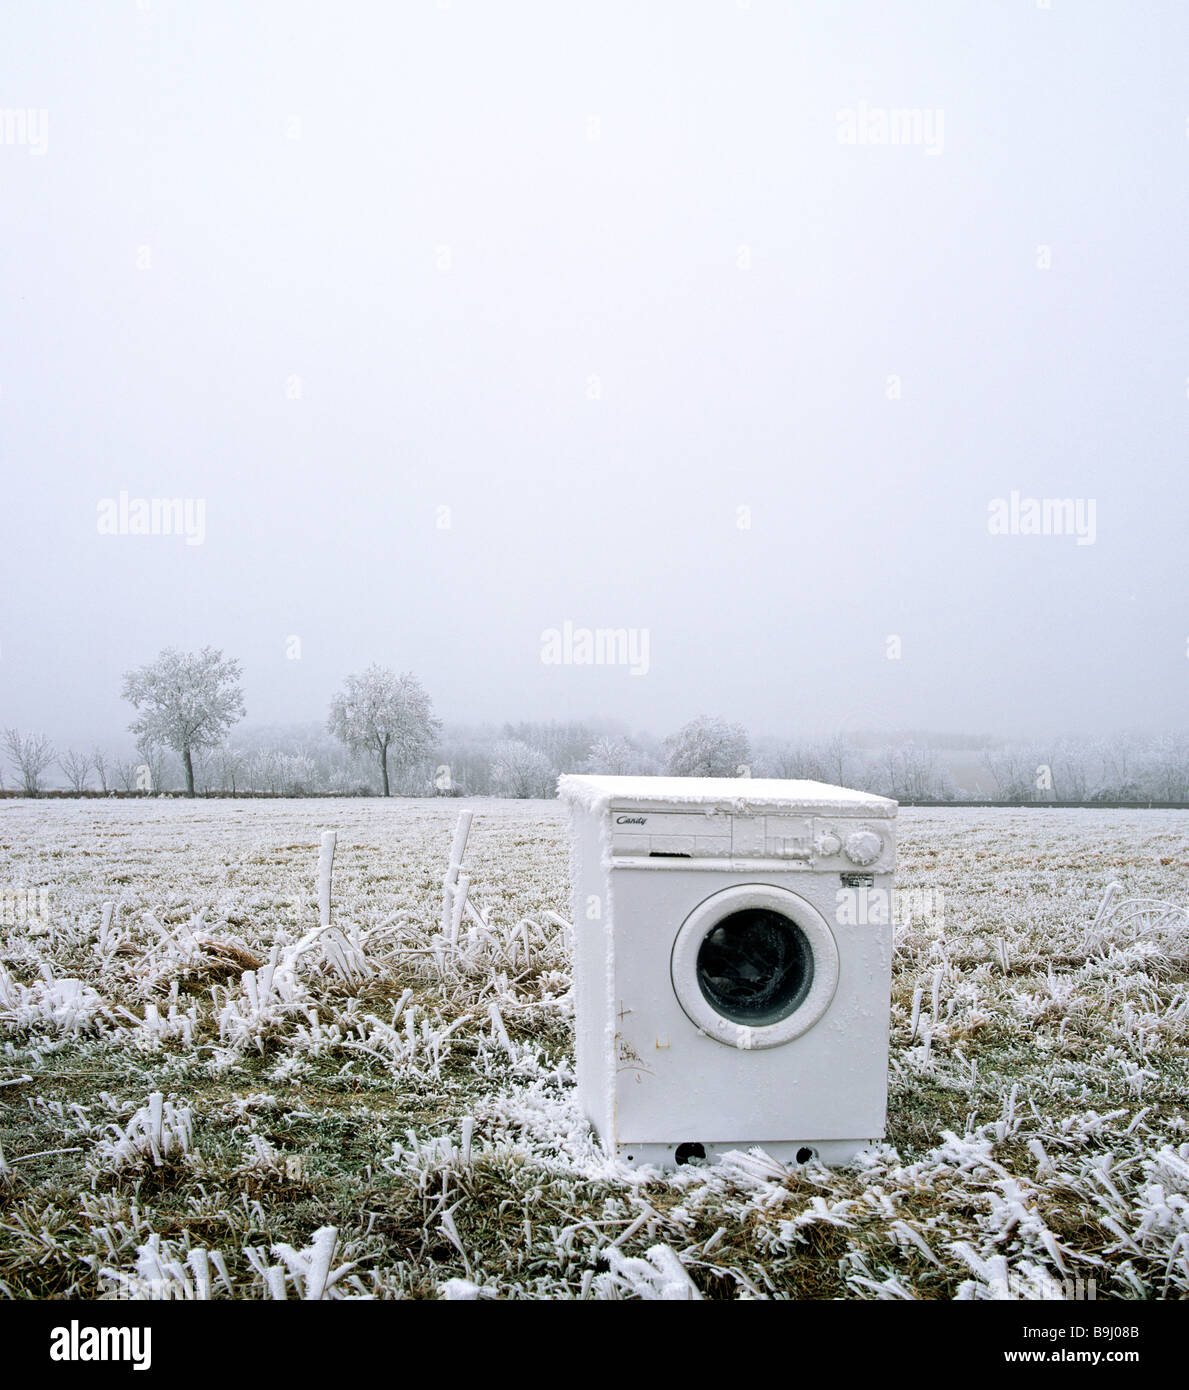 Old washing machine on a field, illegal waste disposal, Germany Stock Photo